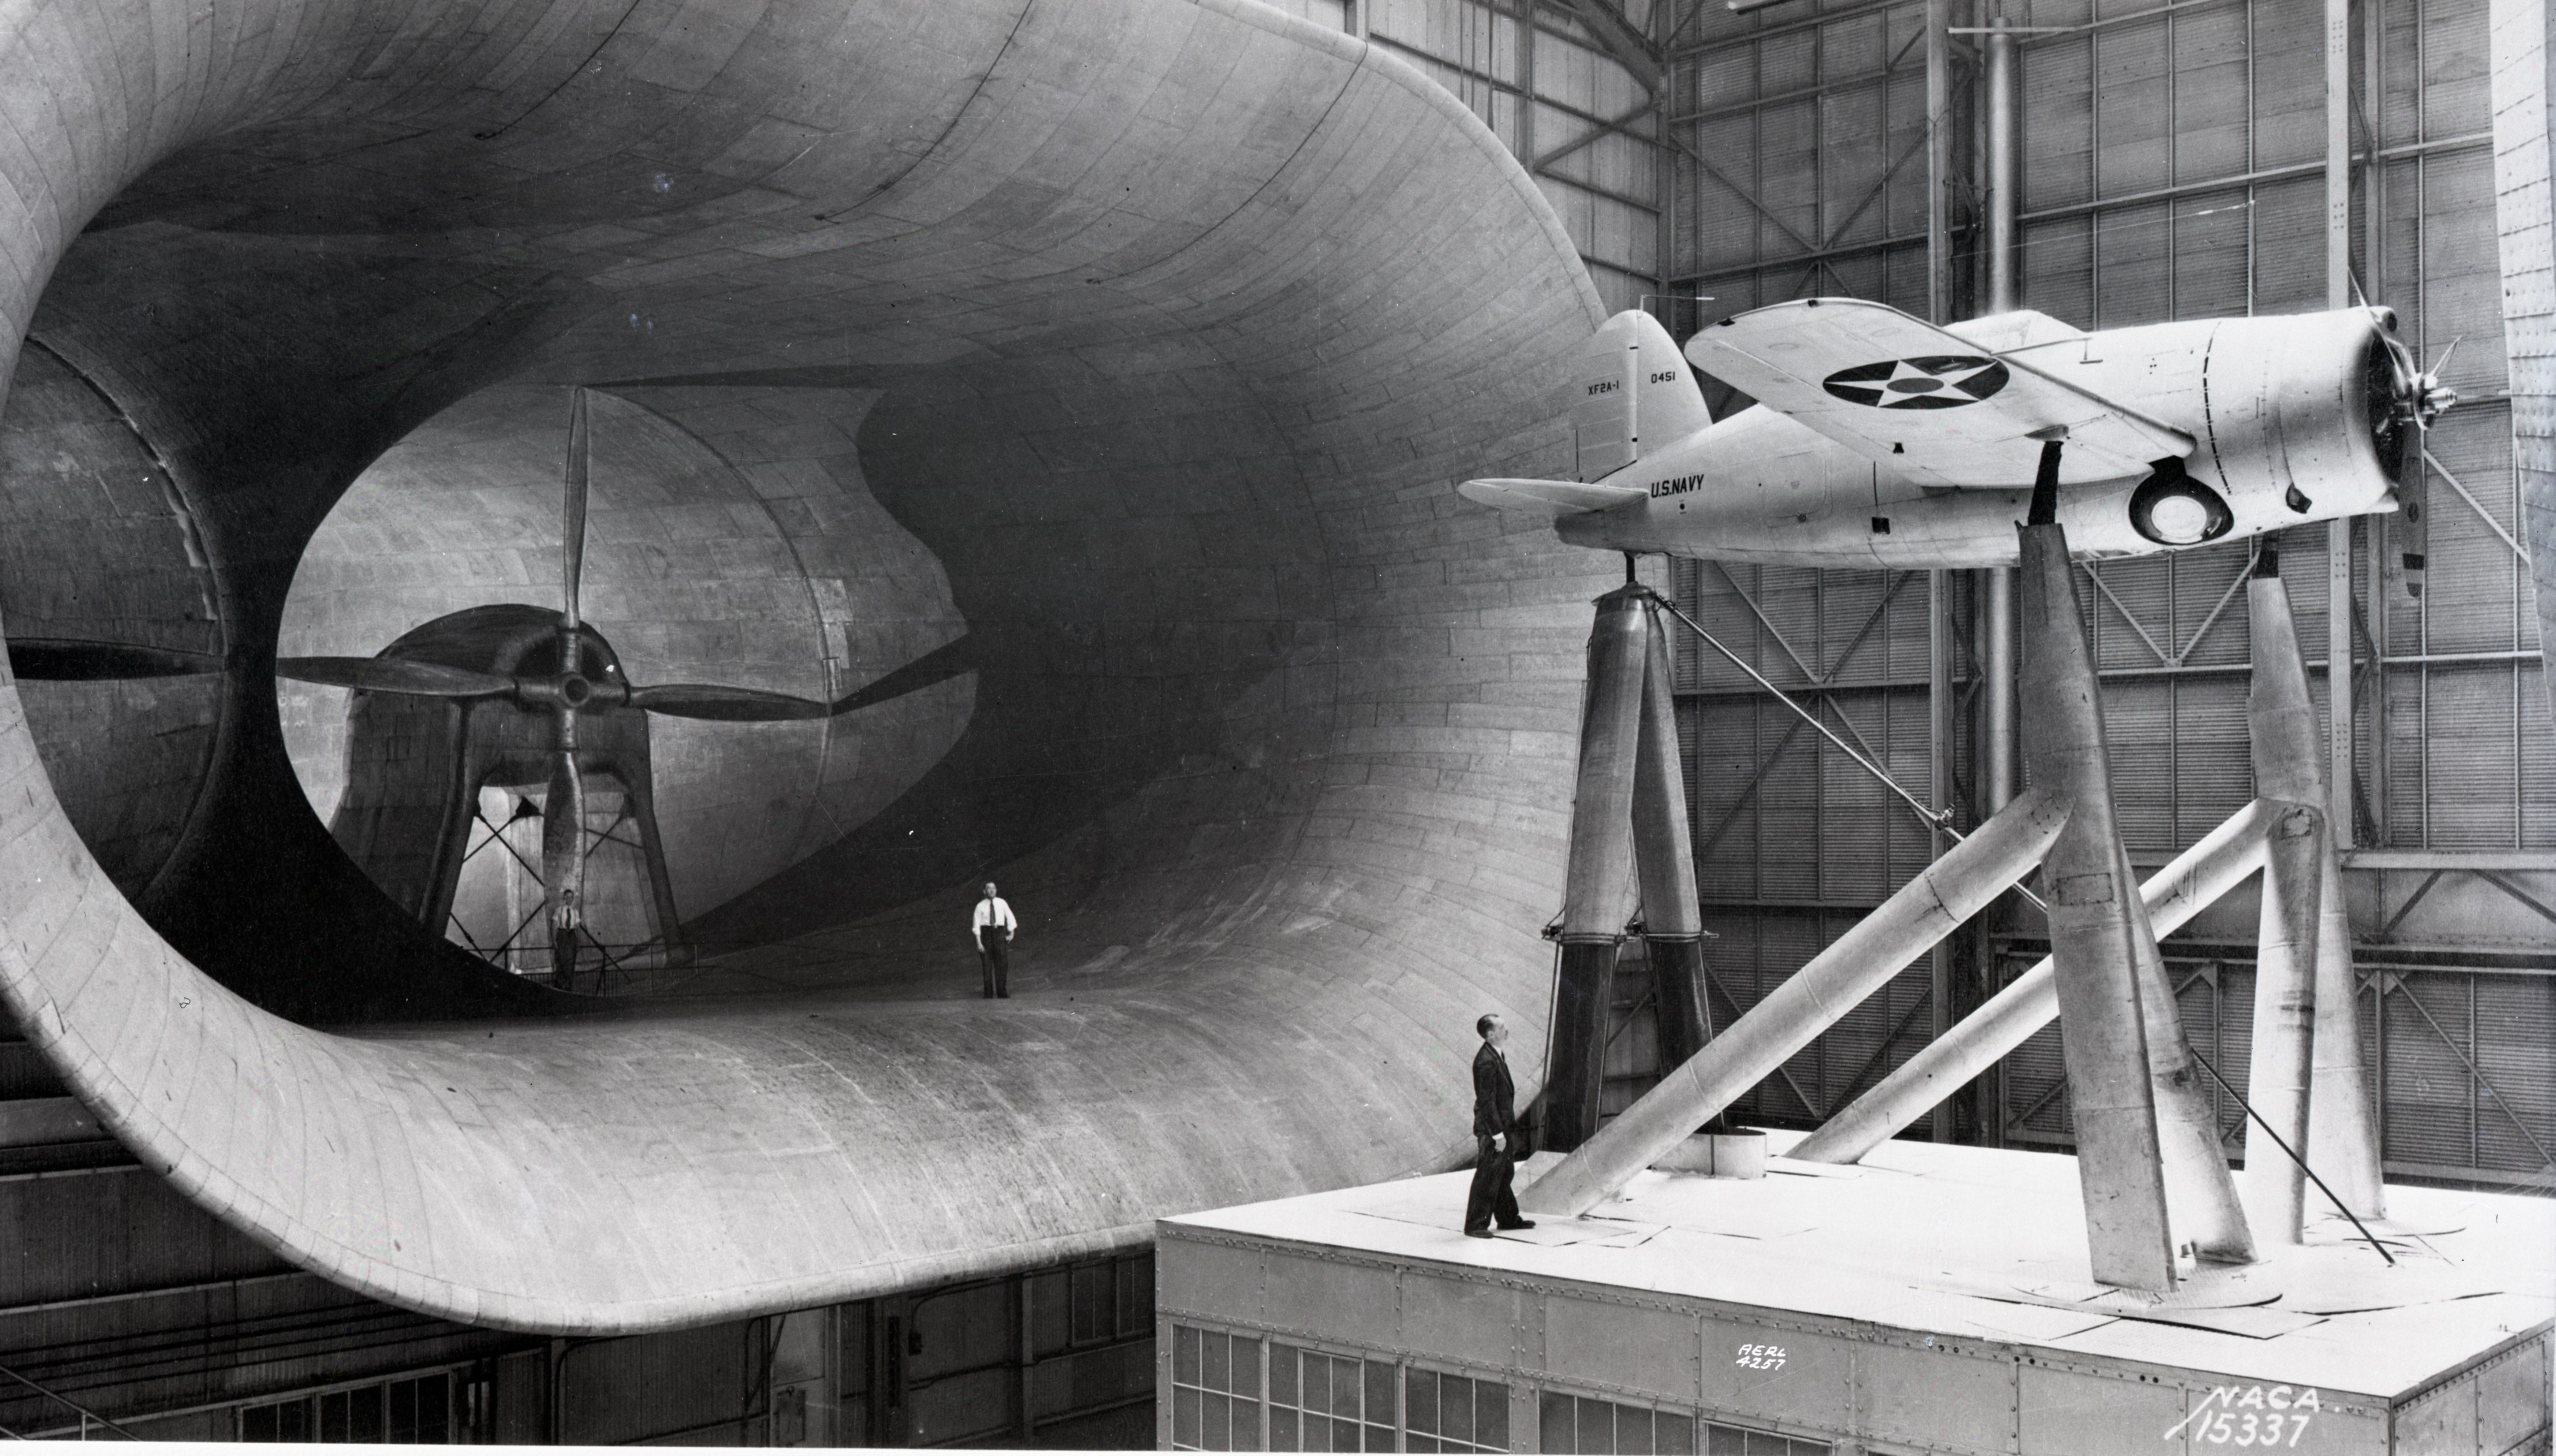 The full-scale wind tunnel